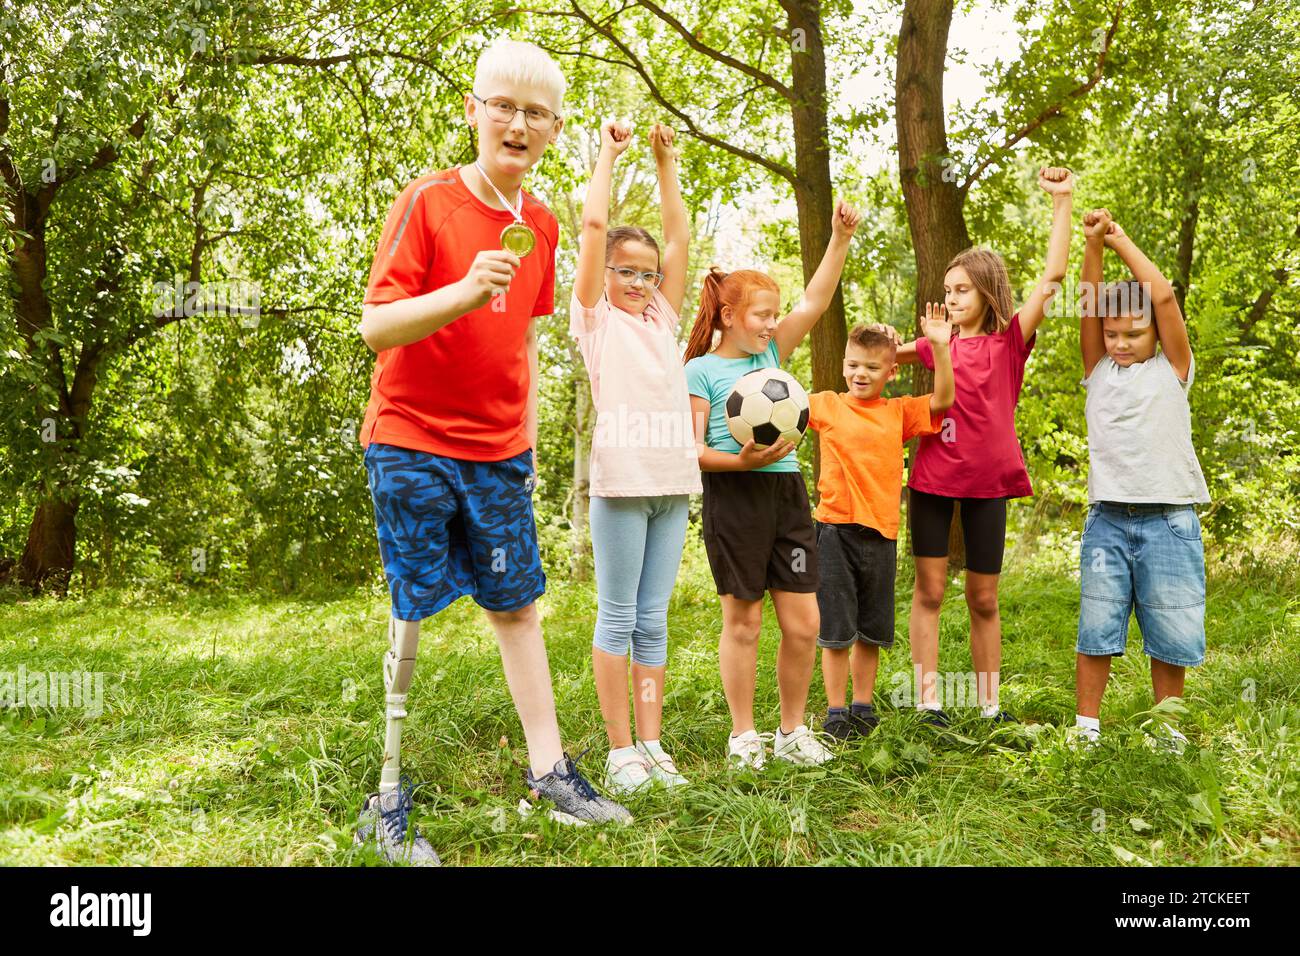 Disabled boy showing medal while standing with friends celebrating victory at park Stock Photo